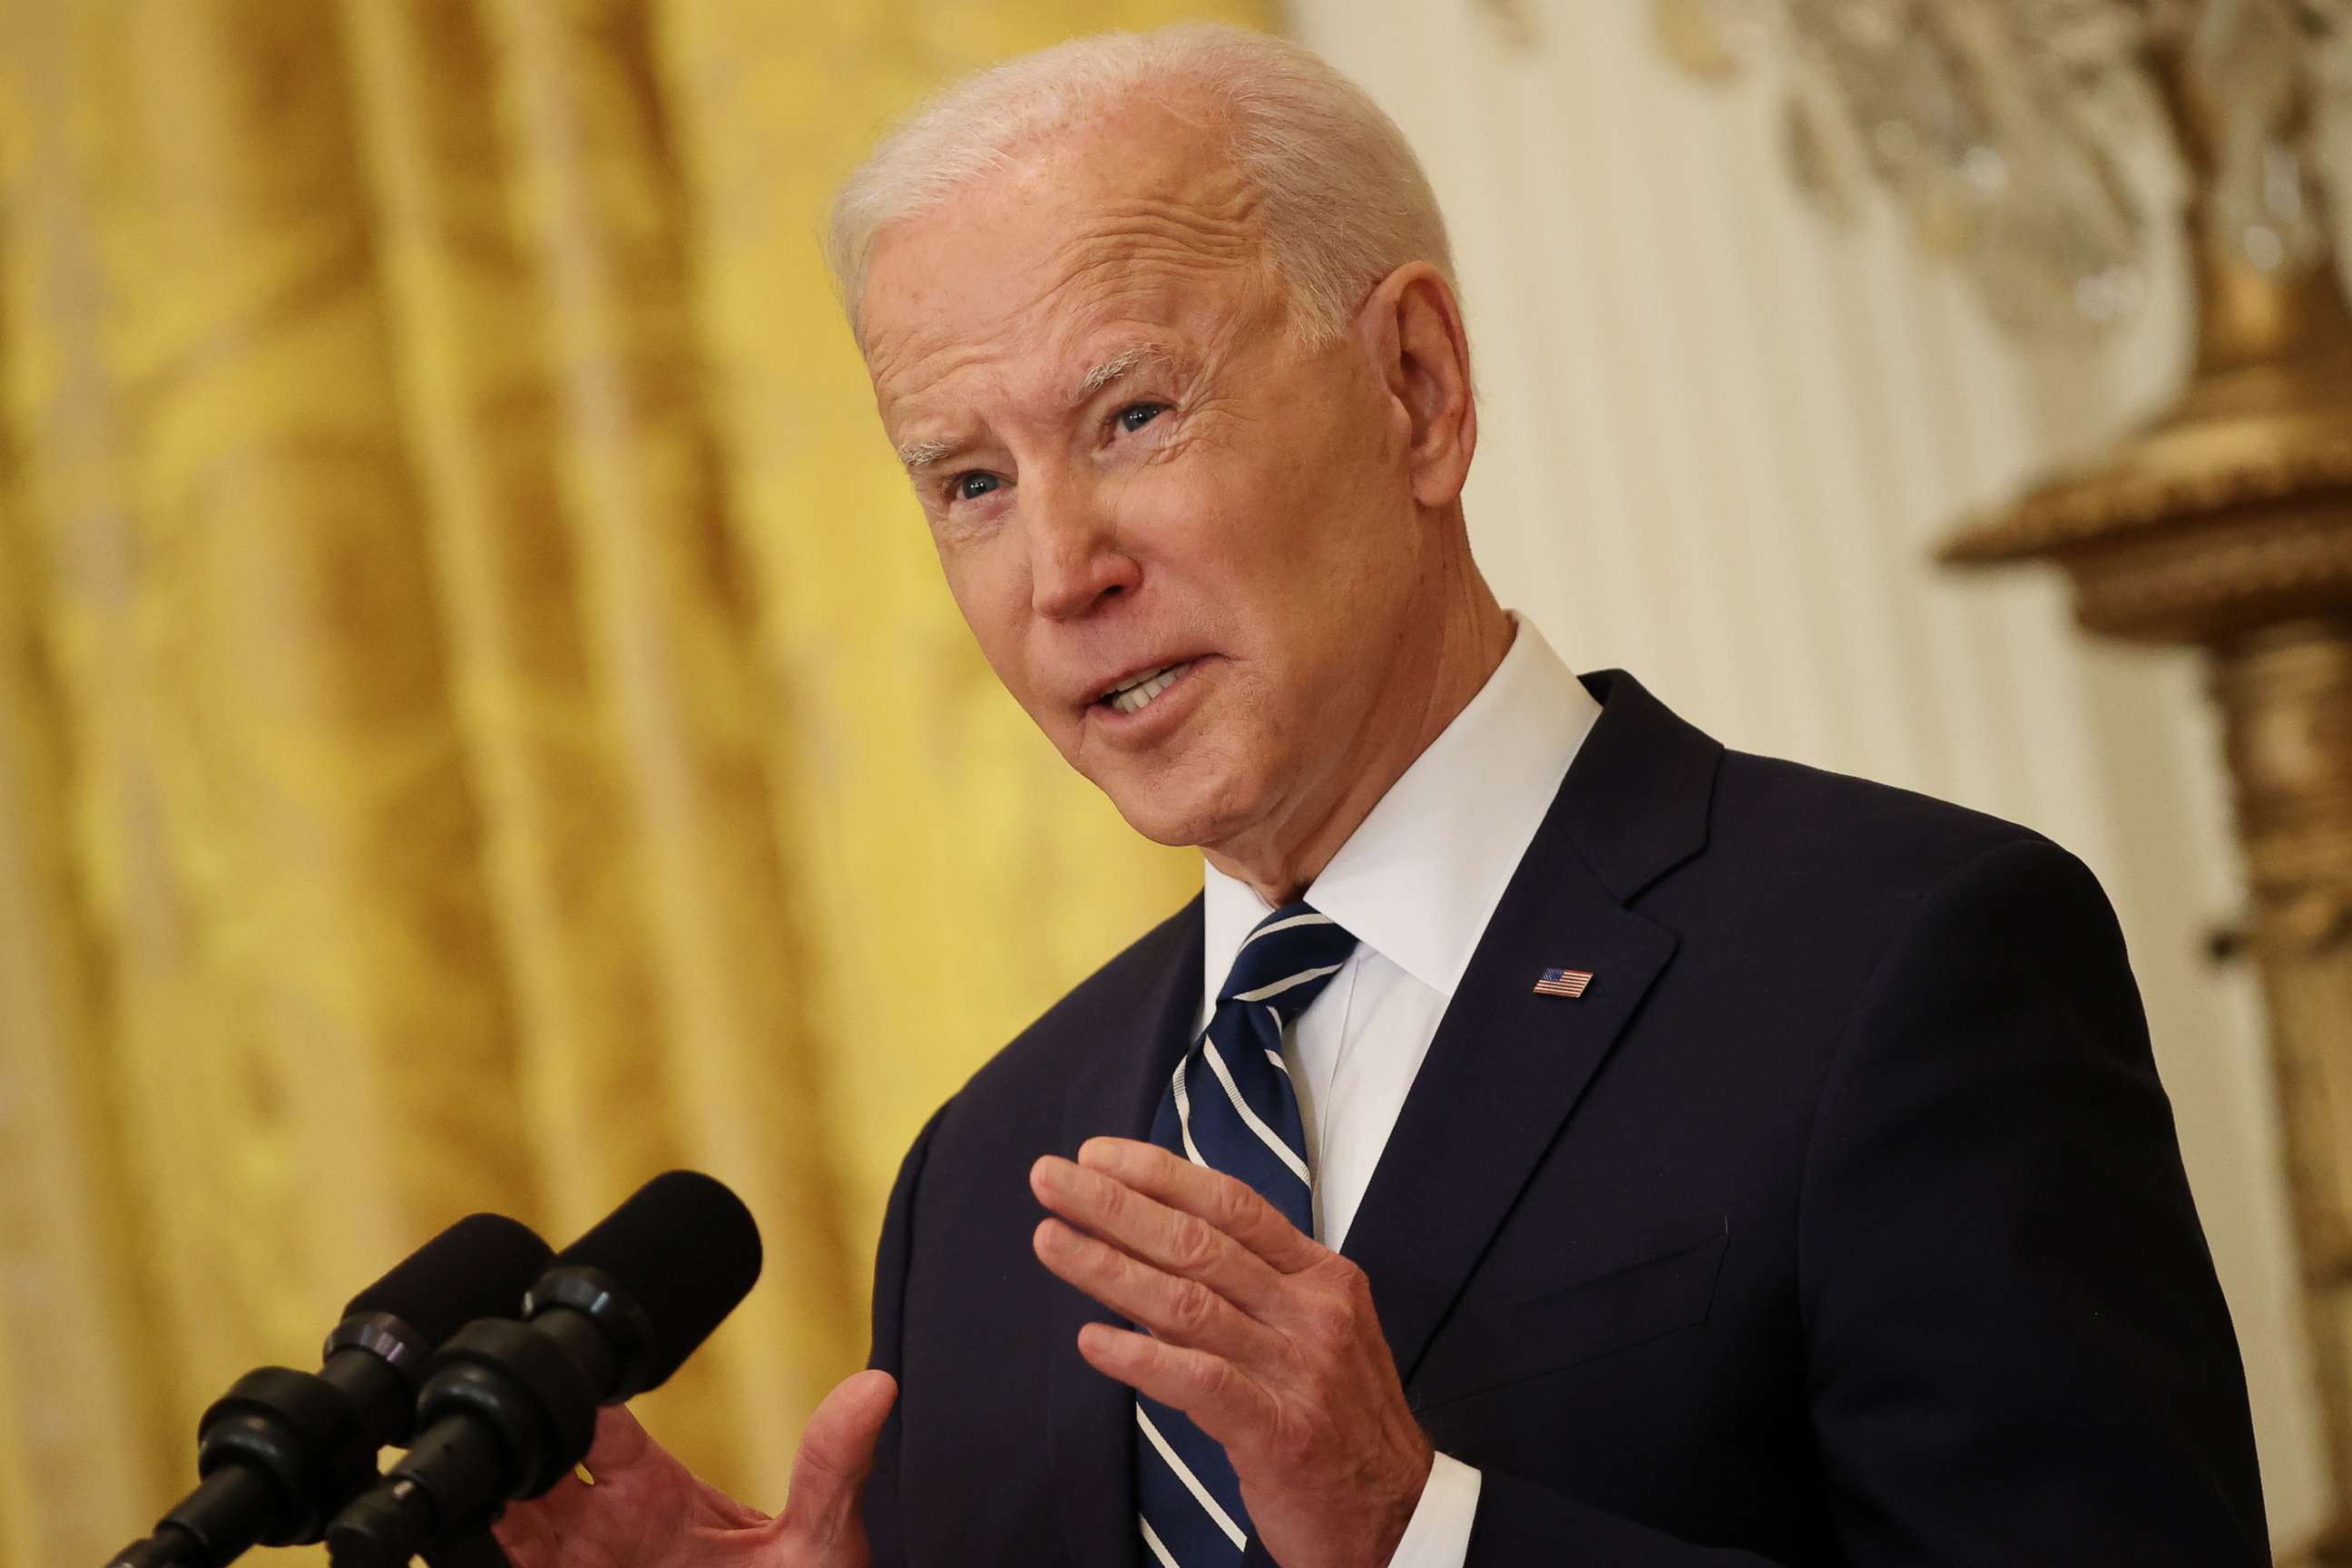 PHOTO: President Joe Biden talks to reporters during the first news conference of his presidency on March 25, 2021.